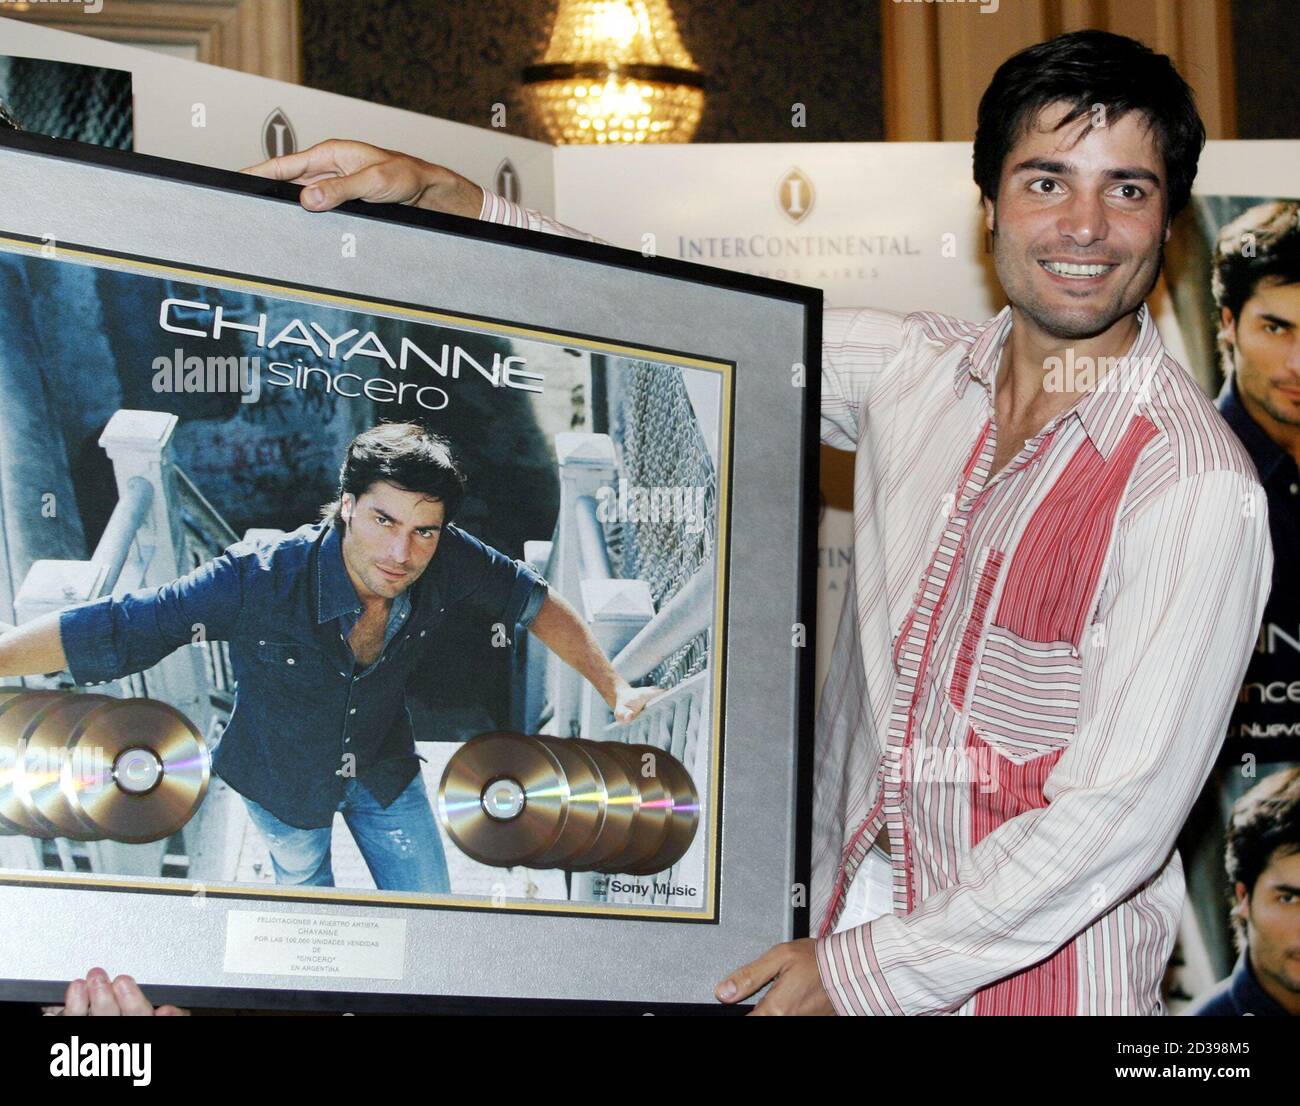 Puerto Rican singer and actor Chayanne, born Elmer Figueroa Arce, shows the cover of his latest album "Sincero" during a press conference in Buenos Aires, Argentina, March 8, 2004. Chayanne announced a North American tour that will take him across the United States through April, 2004. REUTERS/Enrique Marcarian  EM Banque D'Images